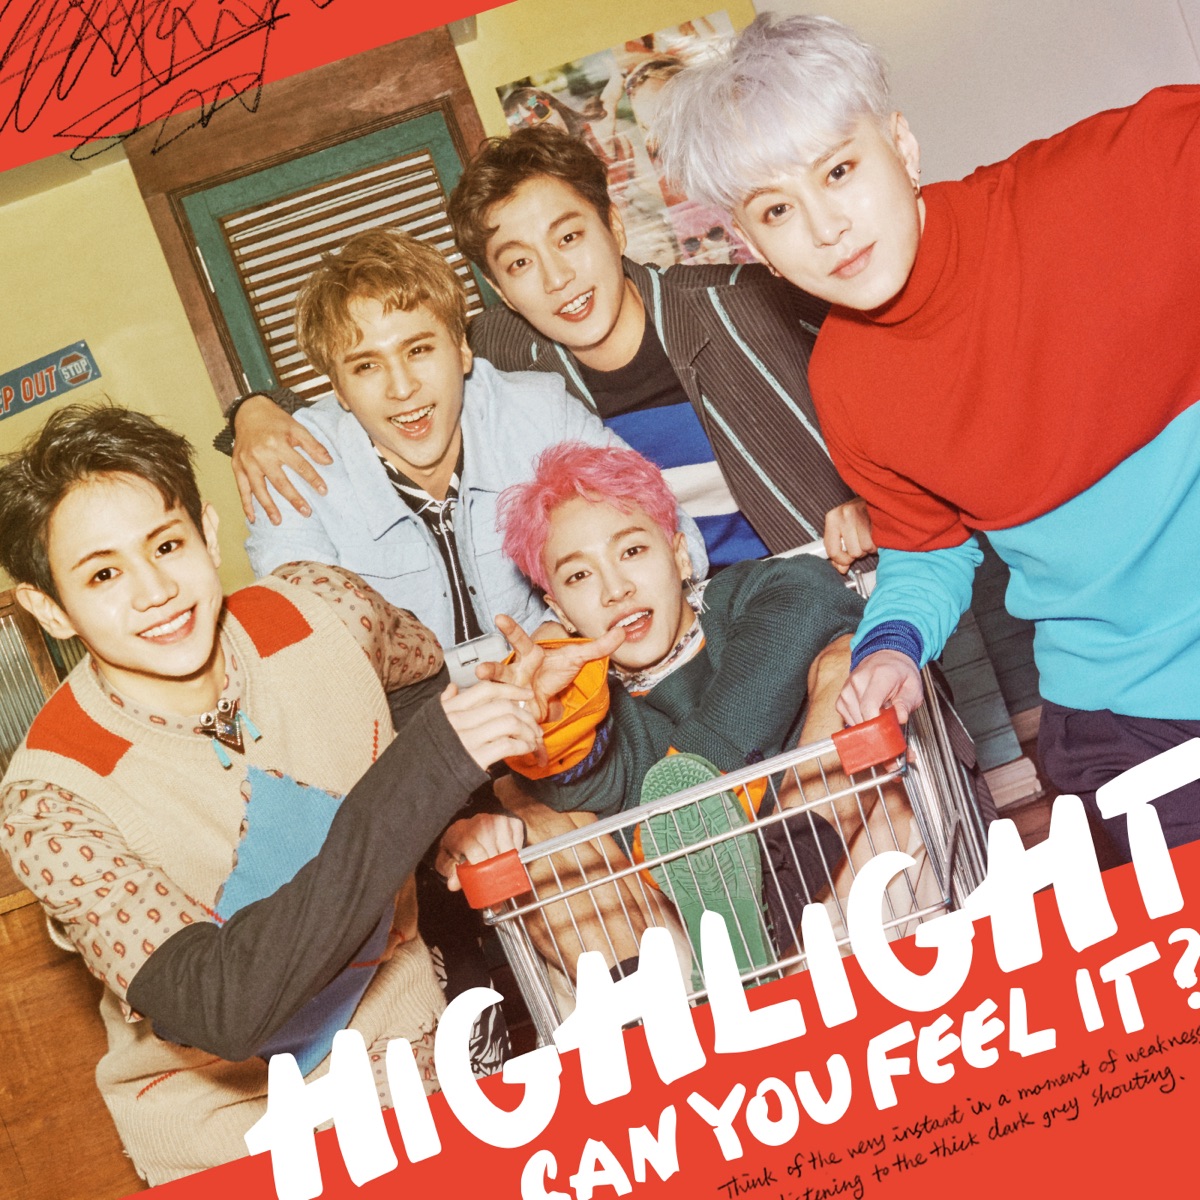 HIGHLIGHT – CAN YOU FEEL IT? – EP